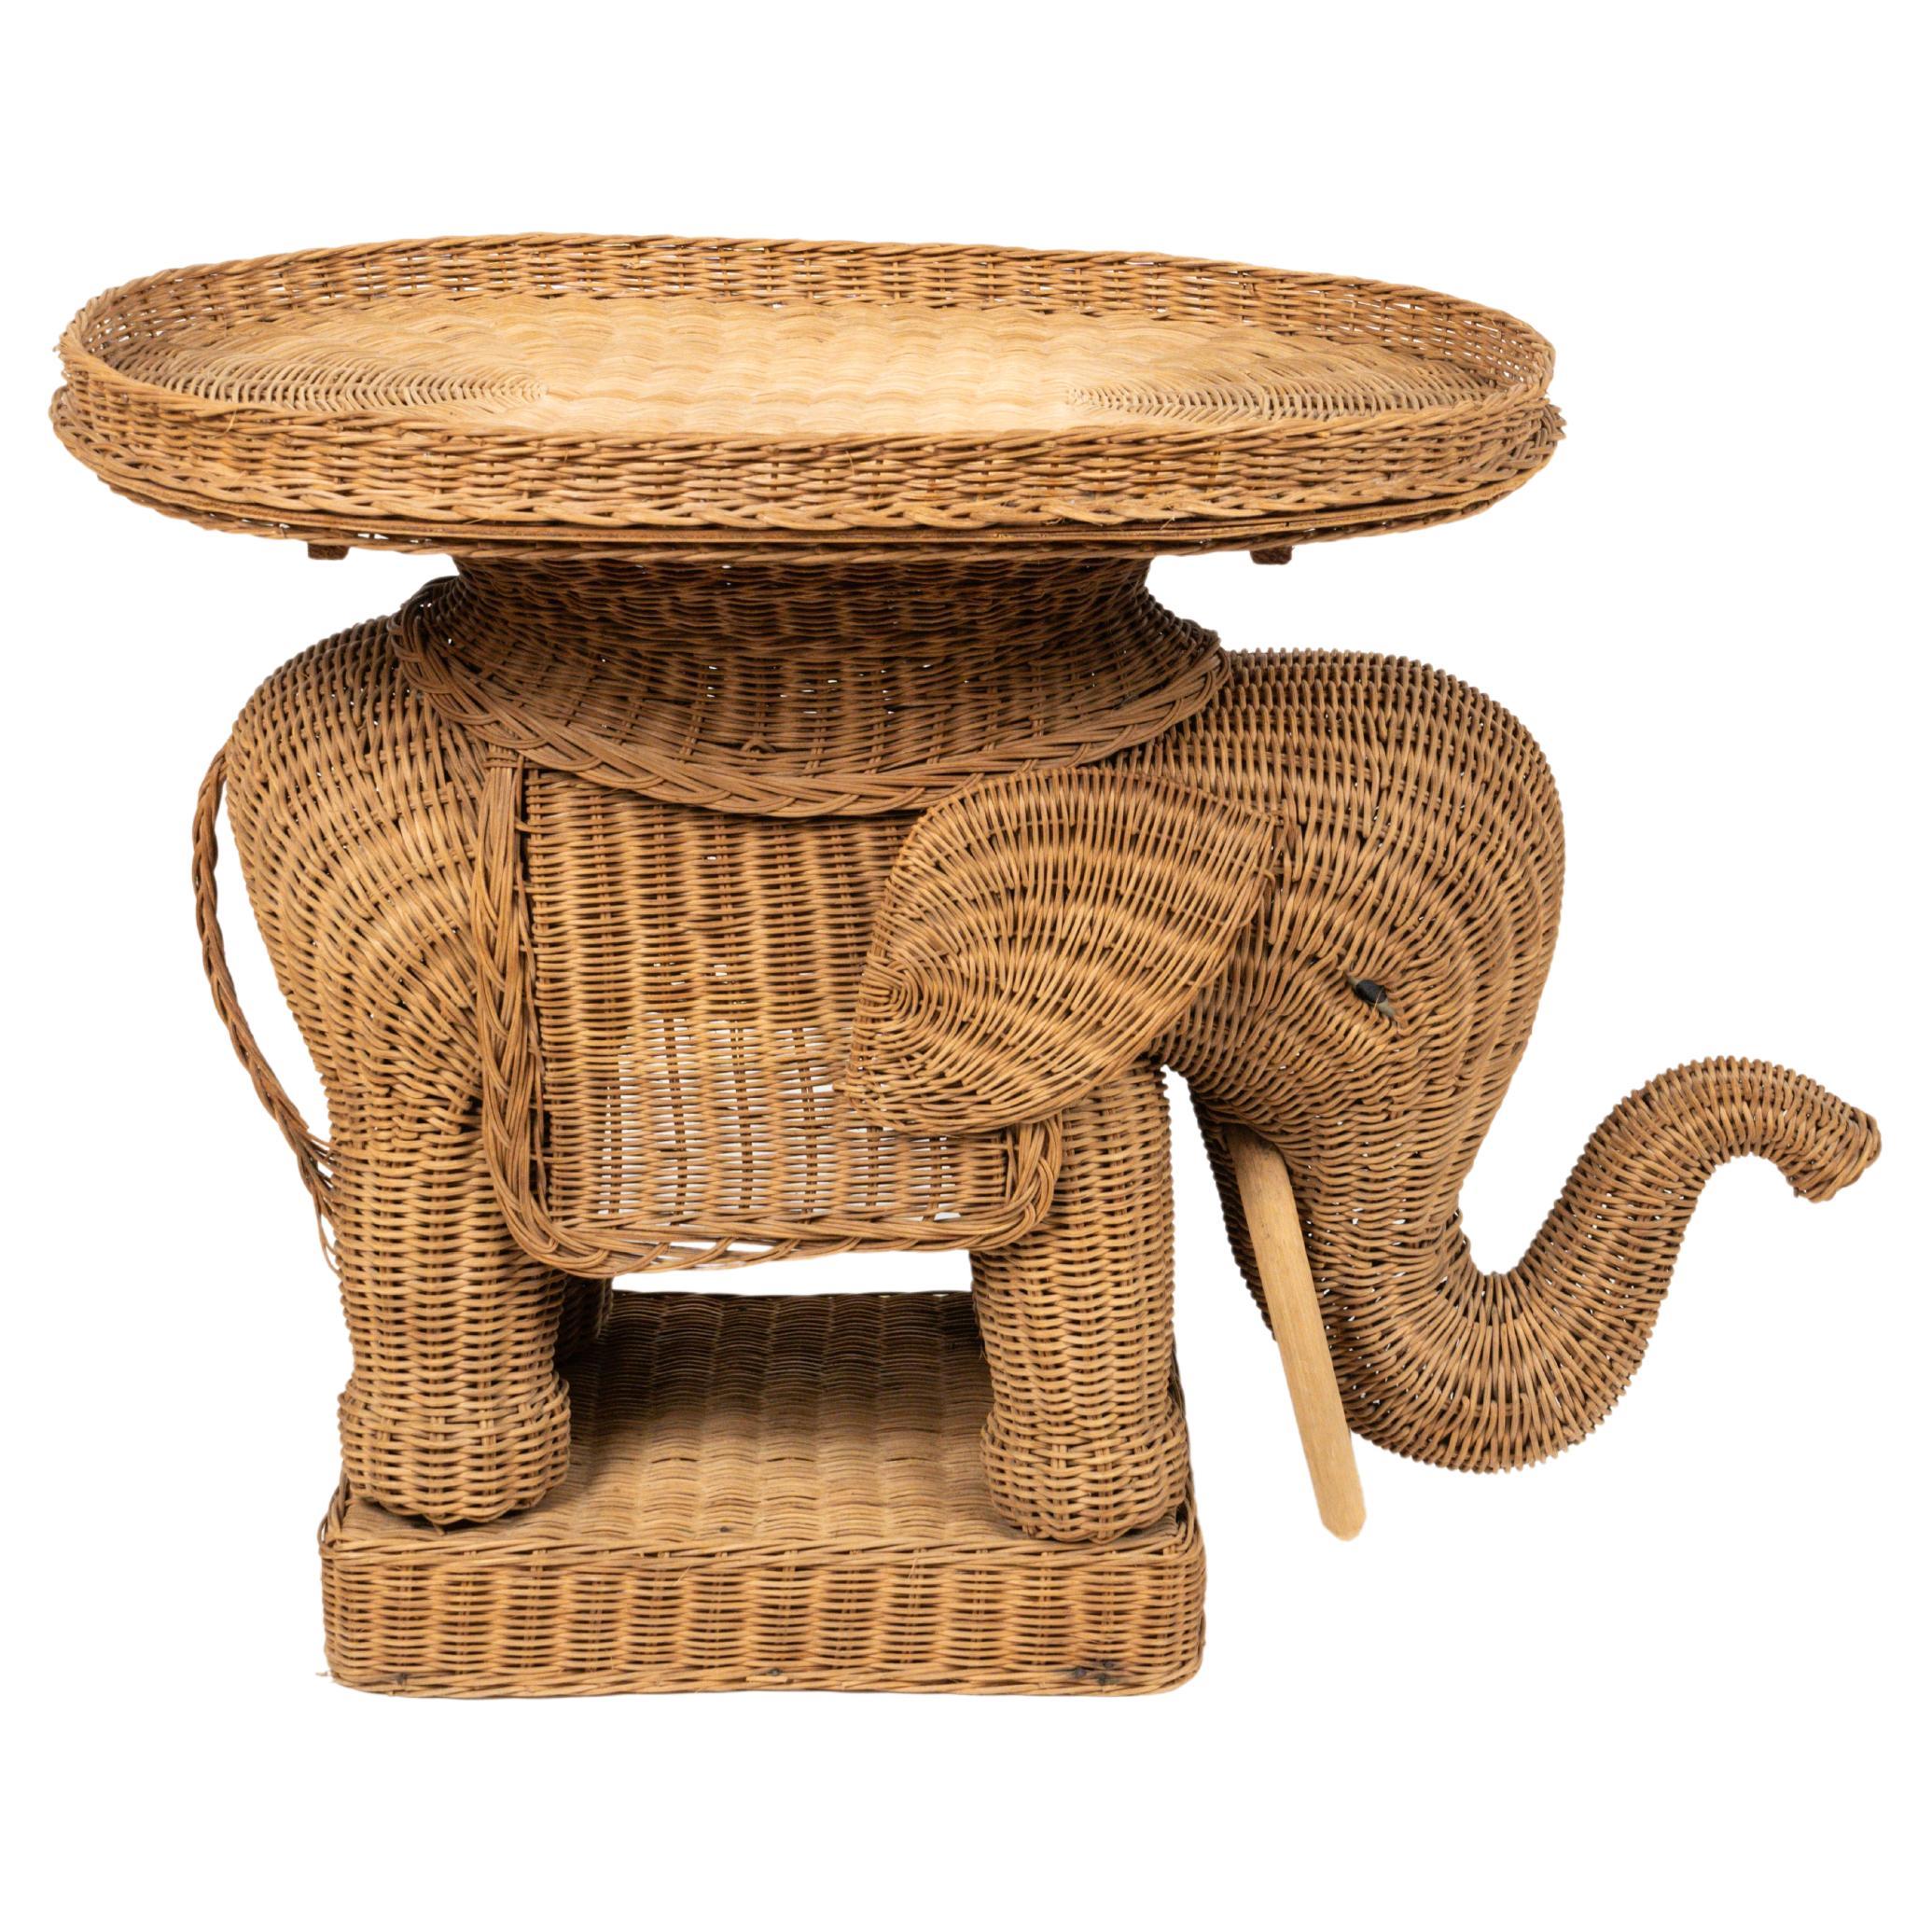 Rattan & Wicker Elephant Side Coffee Table Vivai Del Sud Style, Italy, 1960s For Sale